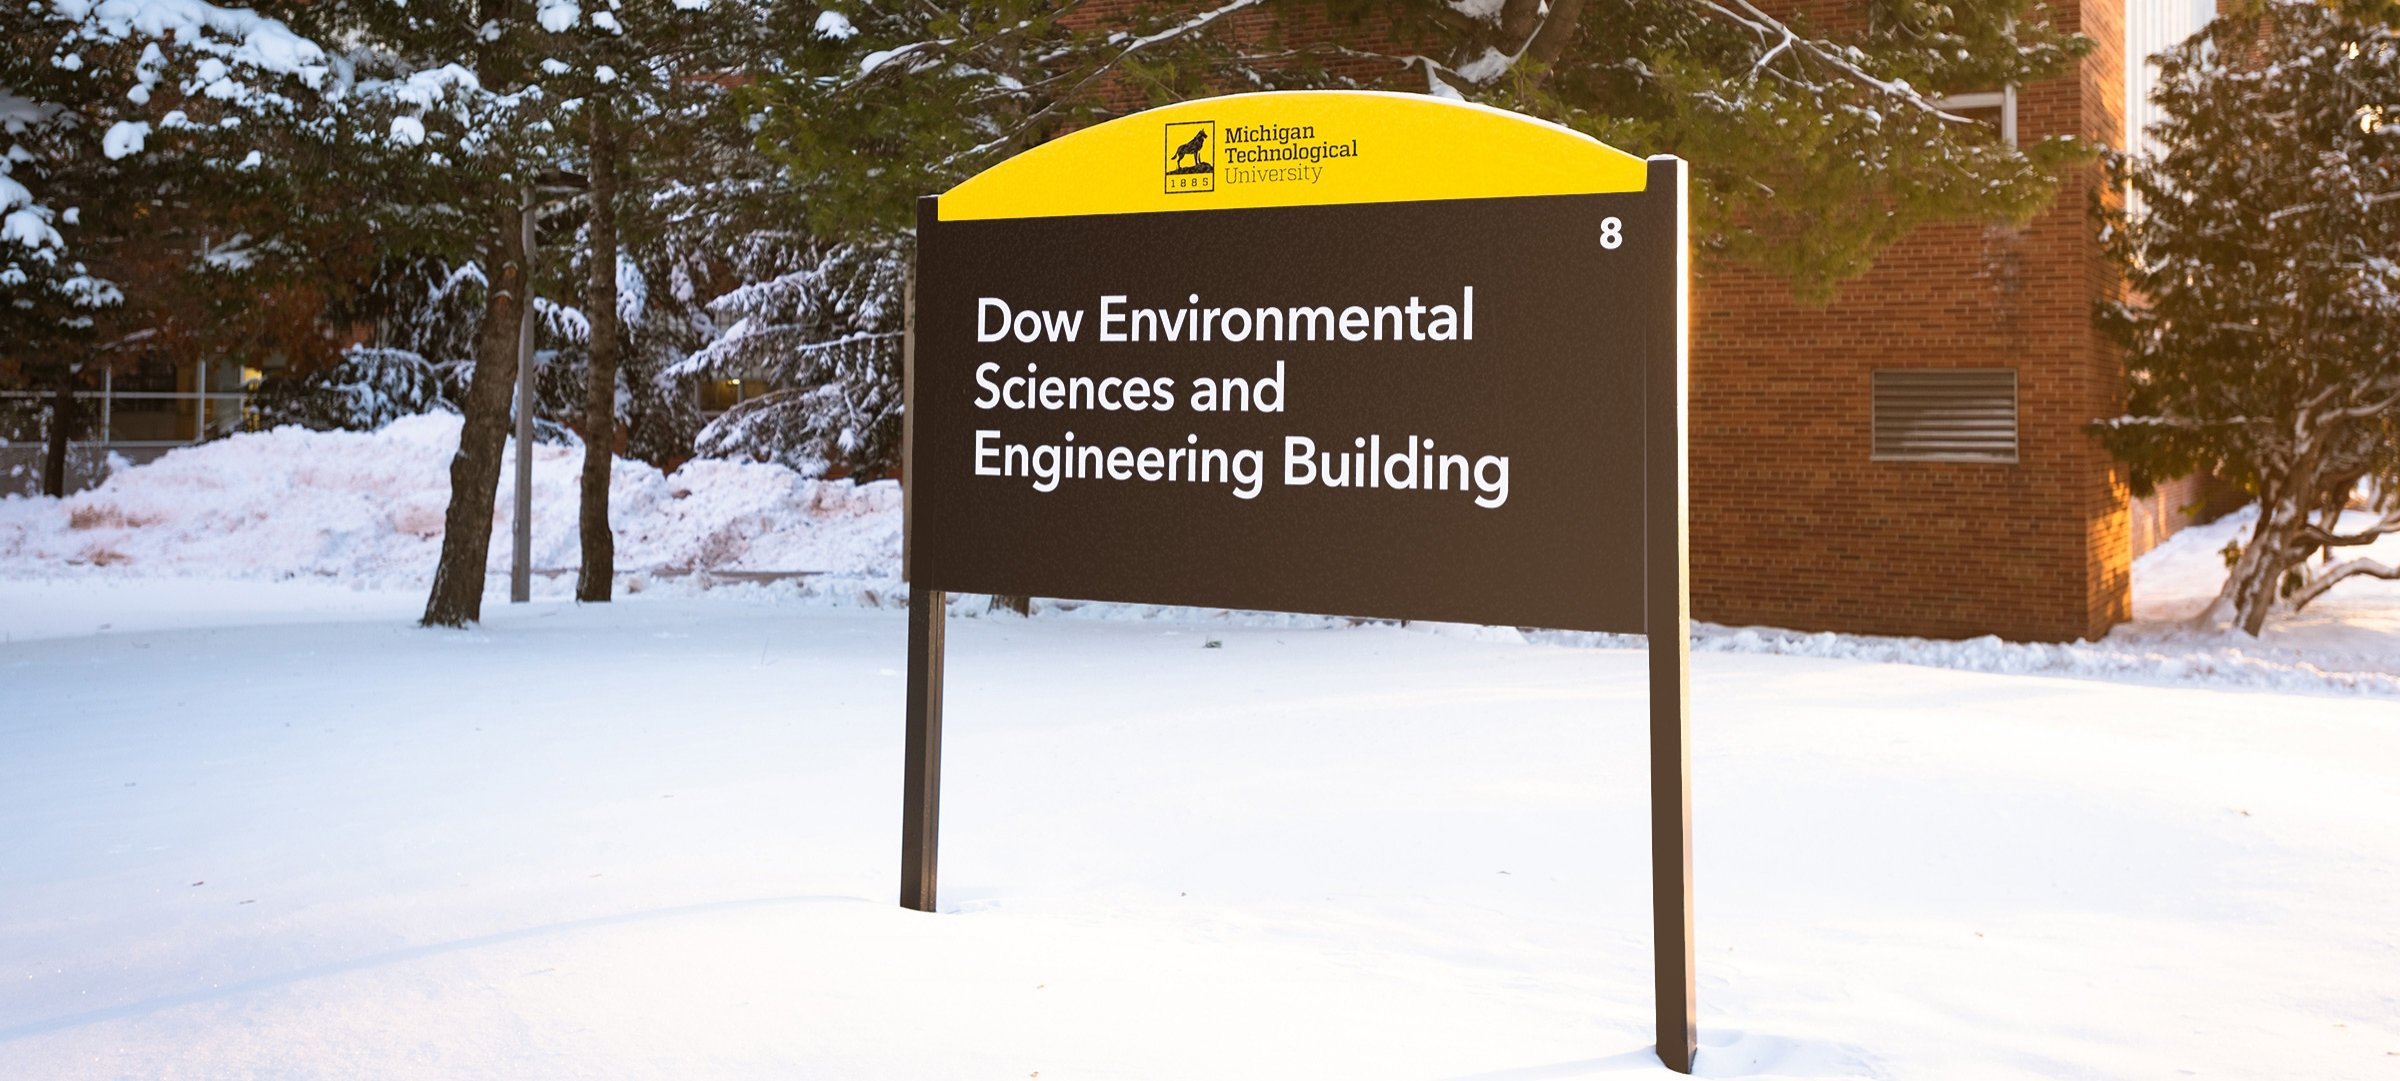 Dow Environmental Sciences and Engineering Building sign